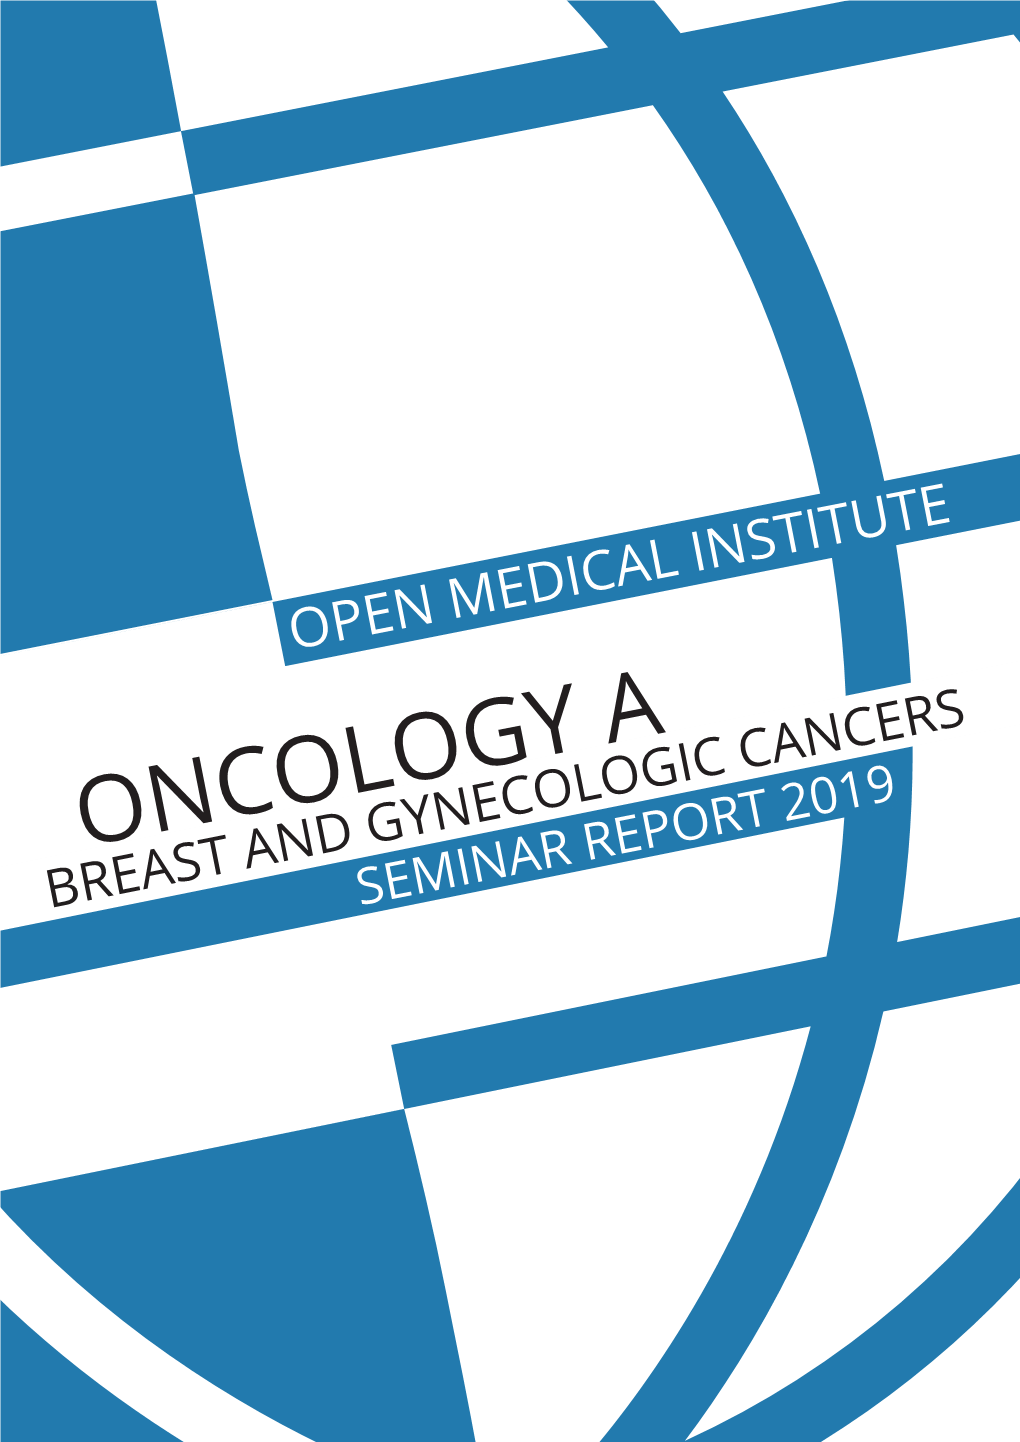 ONCOLOGY A: BREAST and GYNECOLOGIC CANCERS June 9 - 15, 2019